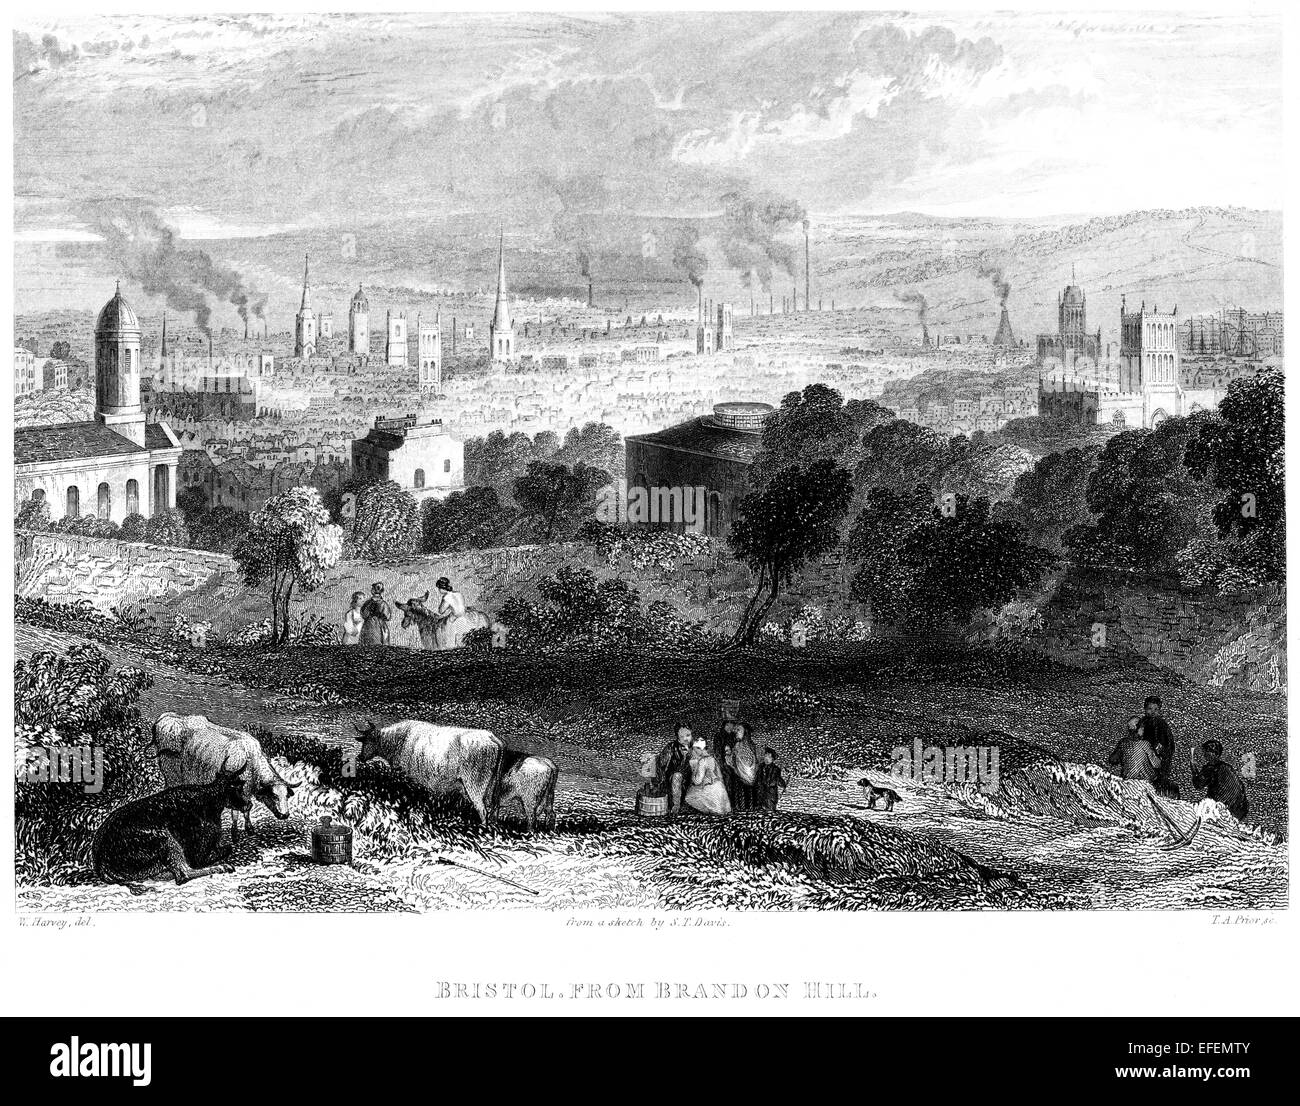 An engraving of Bristol from Brandon Hill scanned at high resolution from a book printed in 1850. Stock Photo